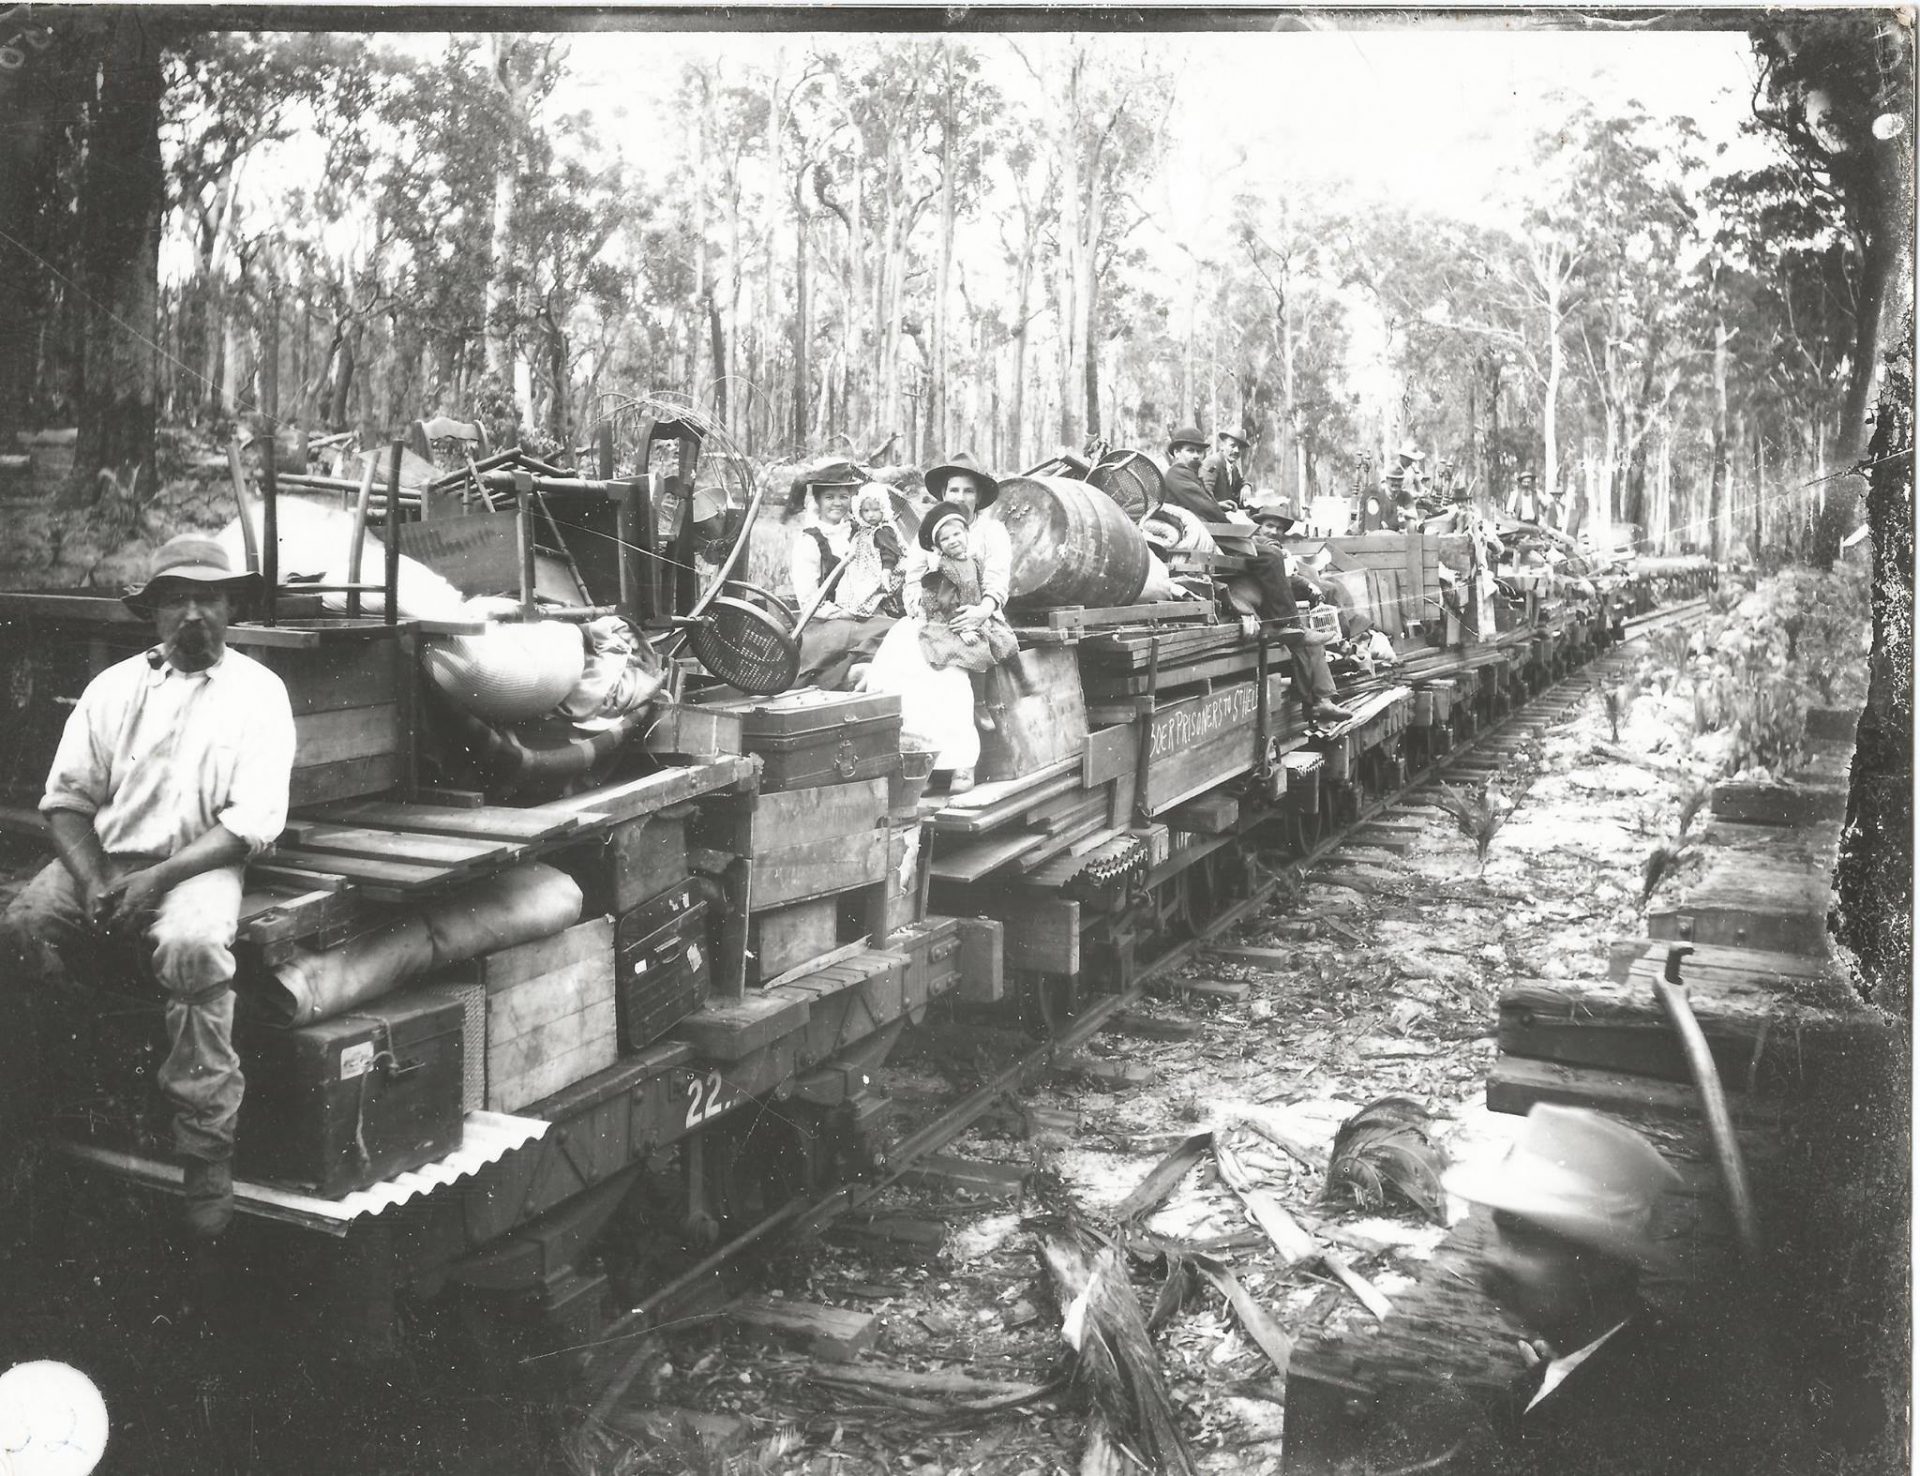 Bush-workers-moving-camping-in-the-Mornington-Mill-area-circa-1900-1920x1476.jpg